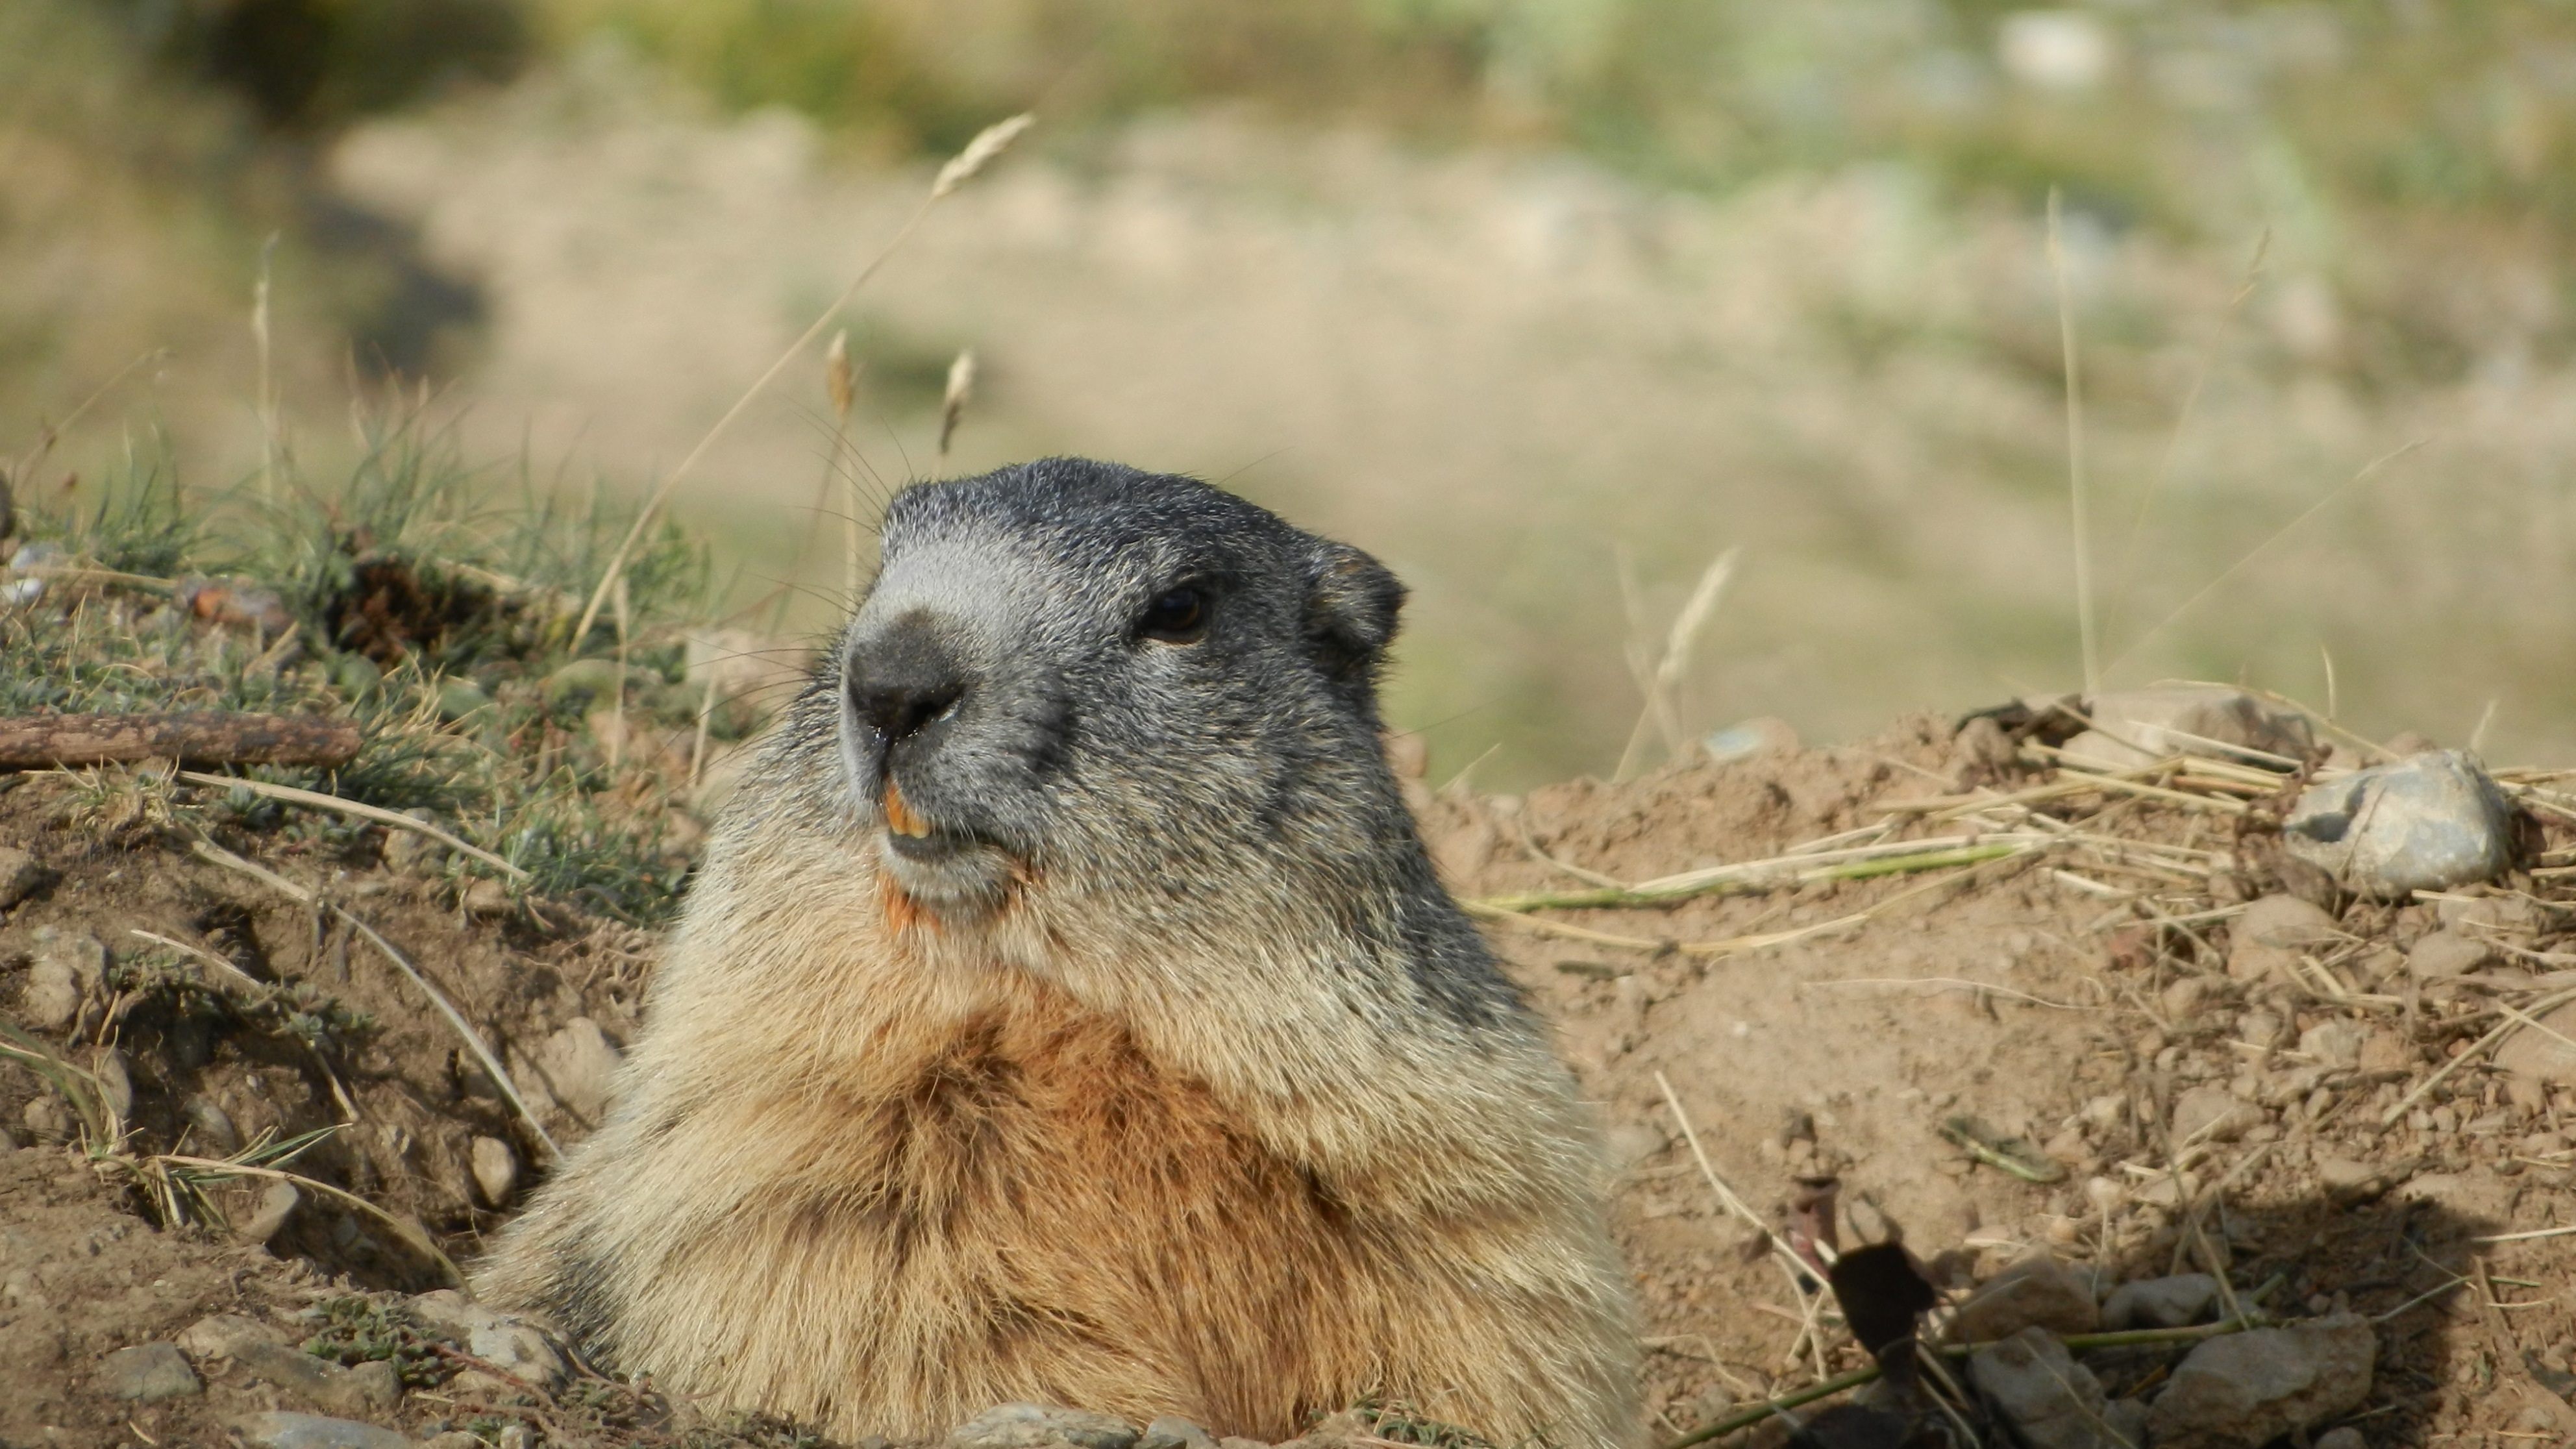 The groundhog looks out of his burrow in the morning